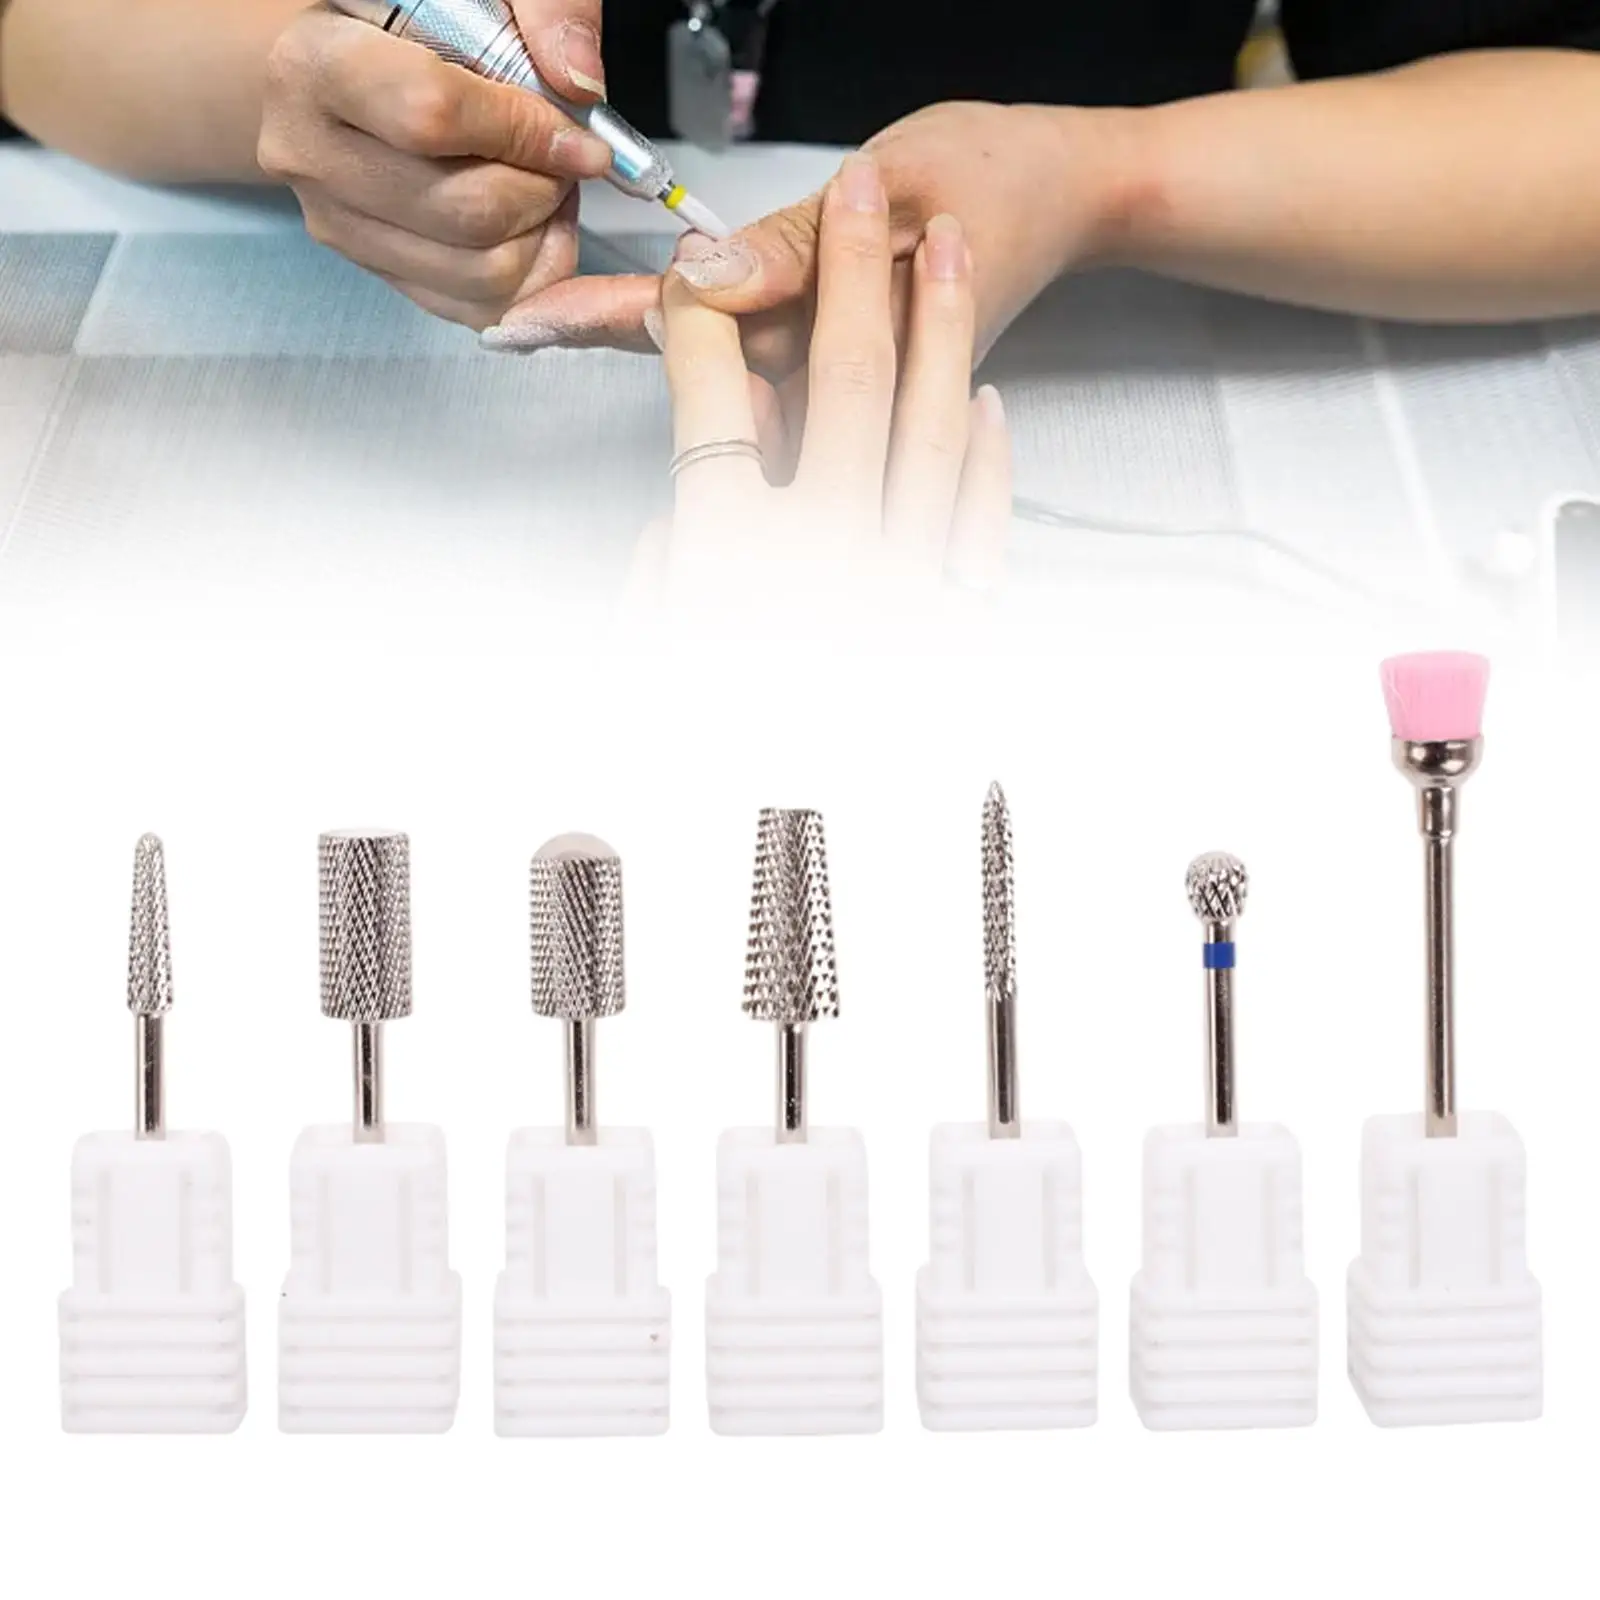 7 Pieces Manicure Bits Electric Manicure Head Replacement Device Cuticle Remove Dust Brush Home Salon Use Nail Polish Bits